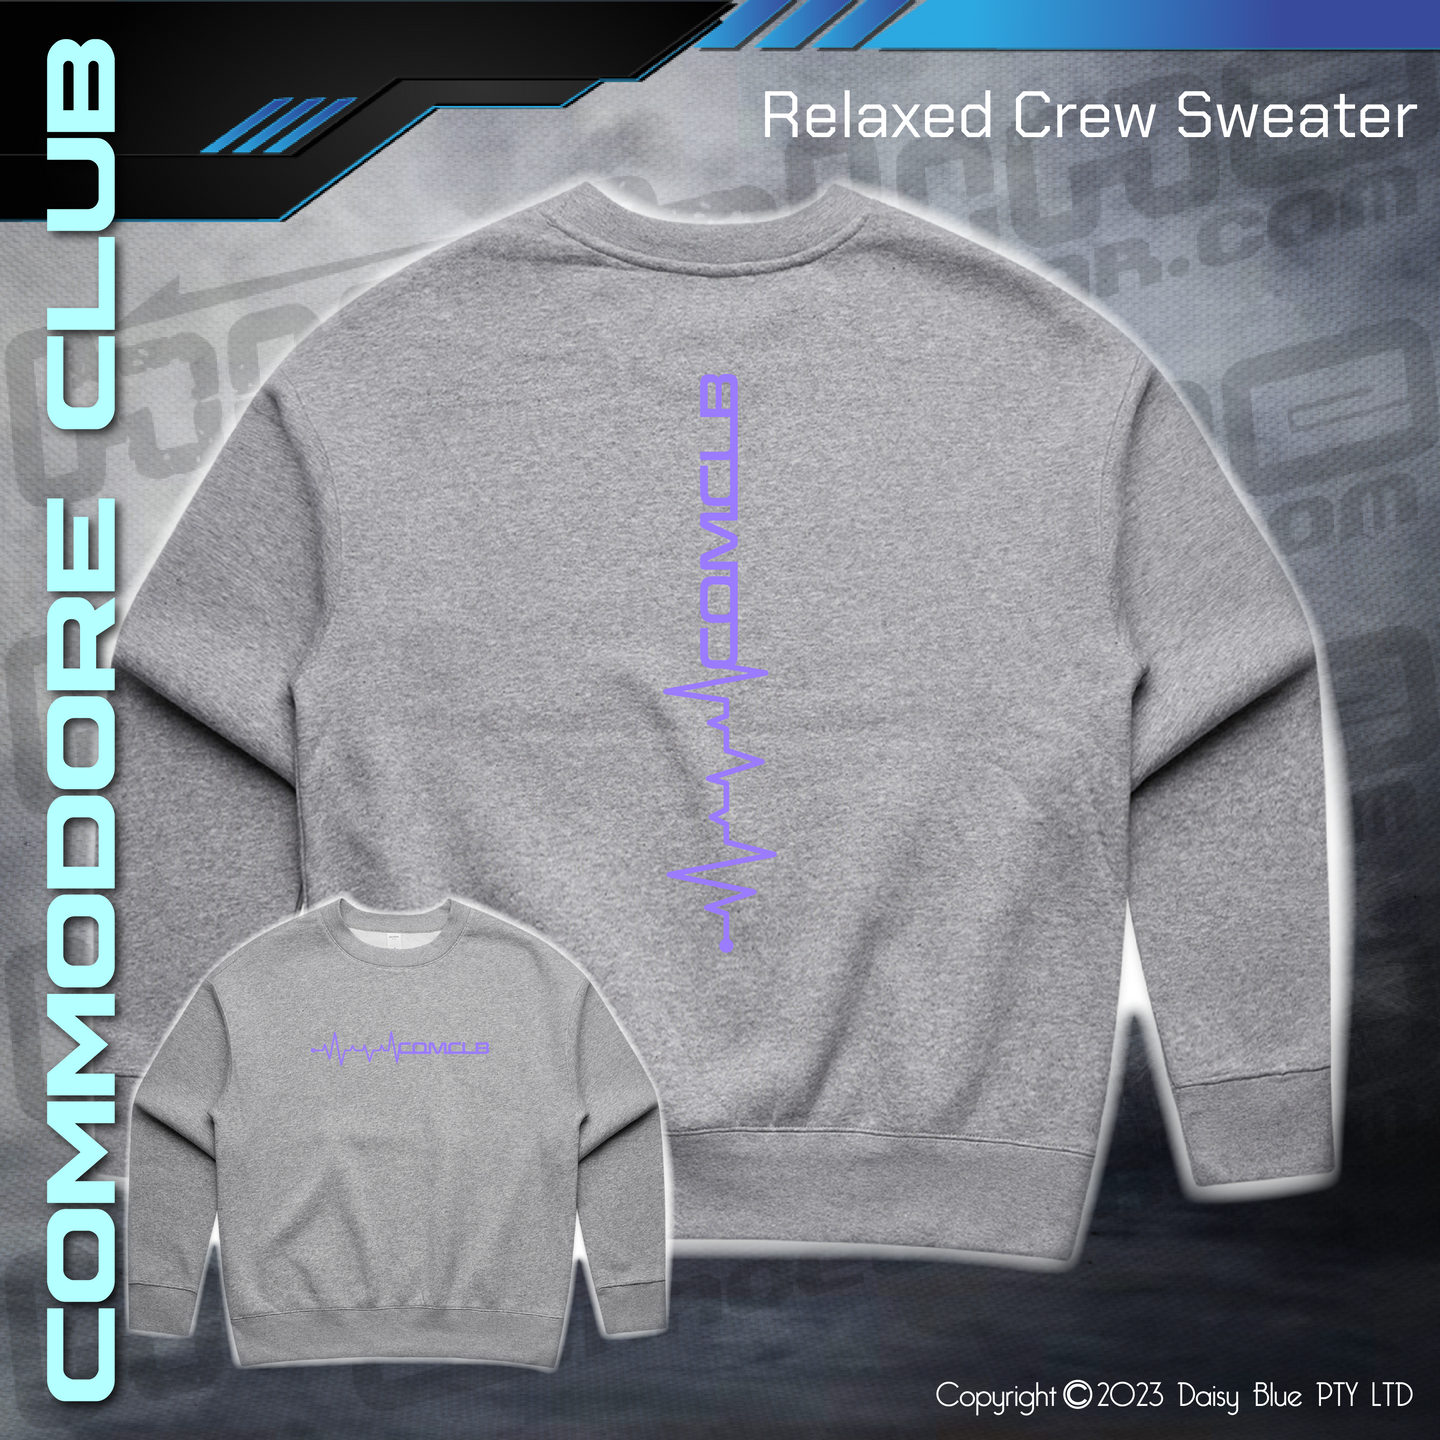 Relaxed Crew Sweater - CC Heartbeat